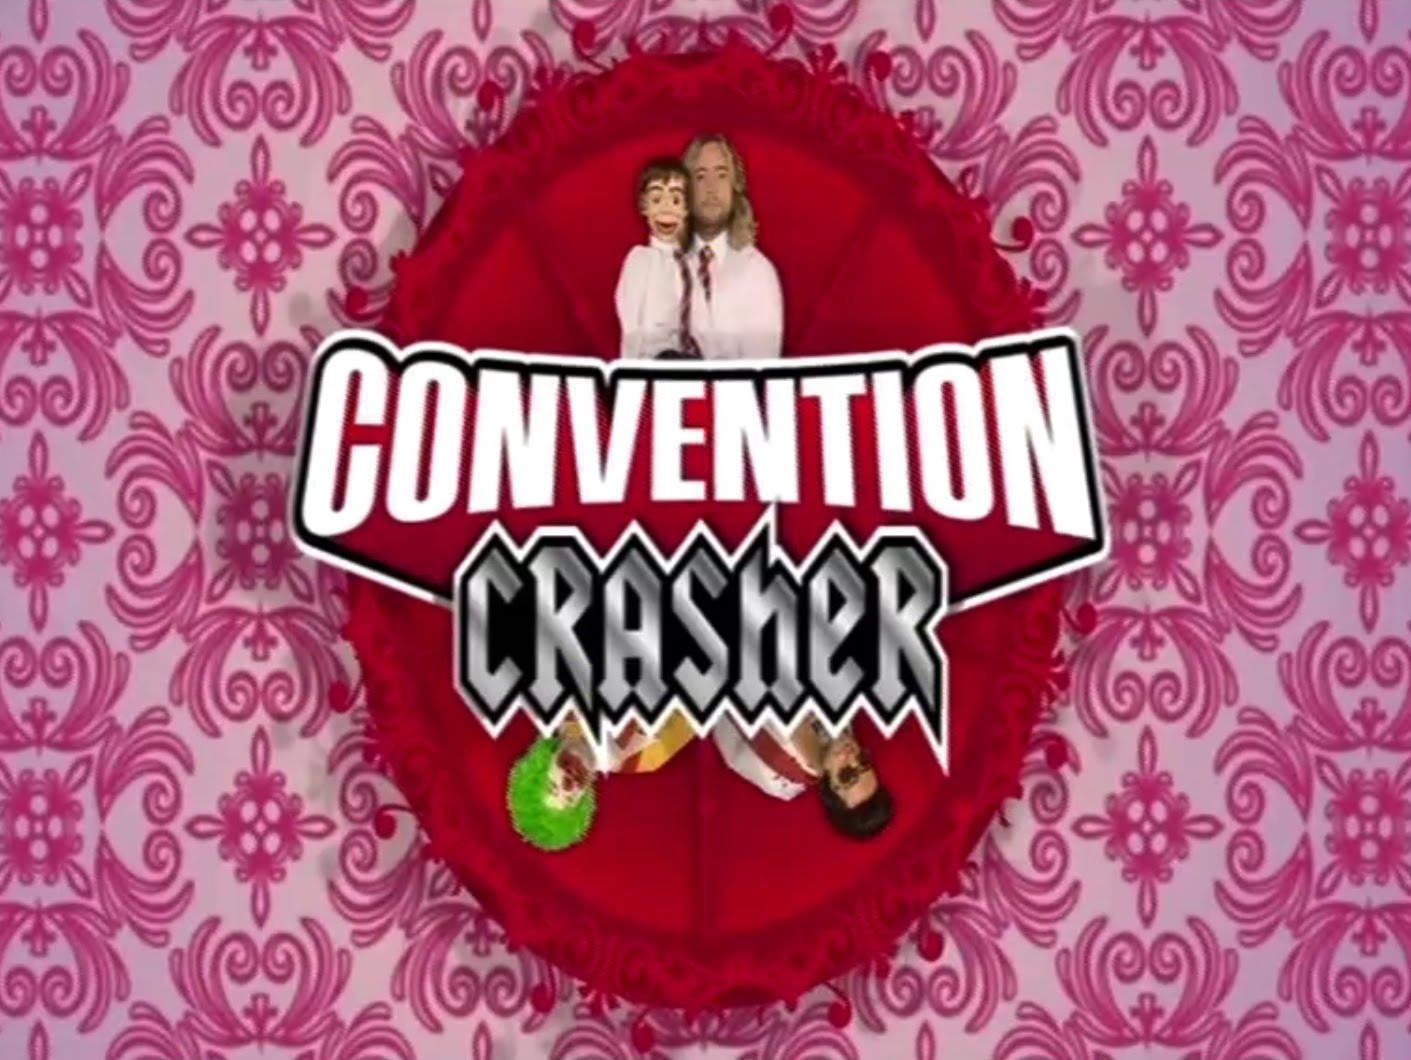 Show The Convention Crasher